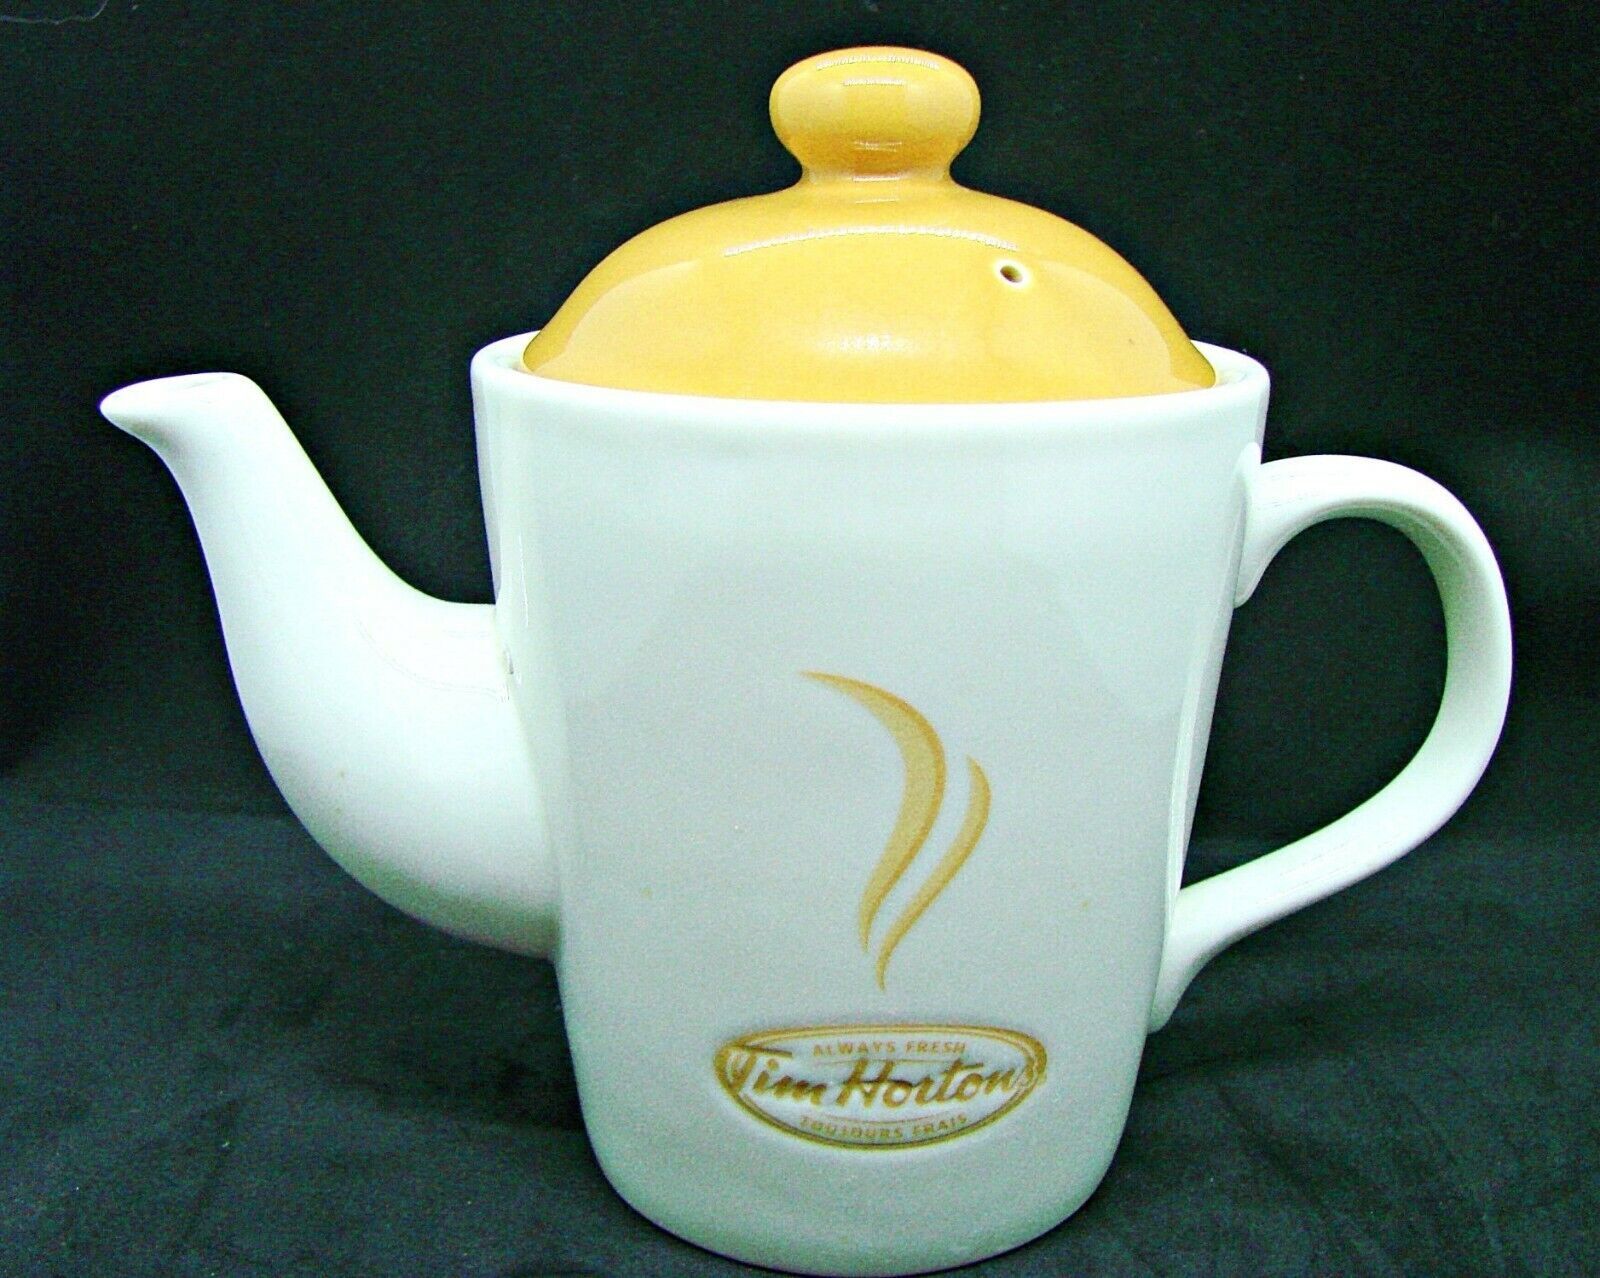 Primary image for TIM HORTONS Always Fresh Coffee Teapot Holds 2 Cup Porcelain Classic White Tan